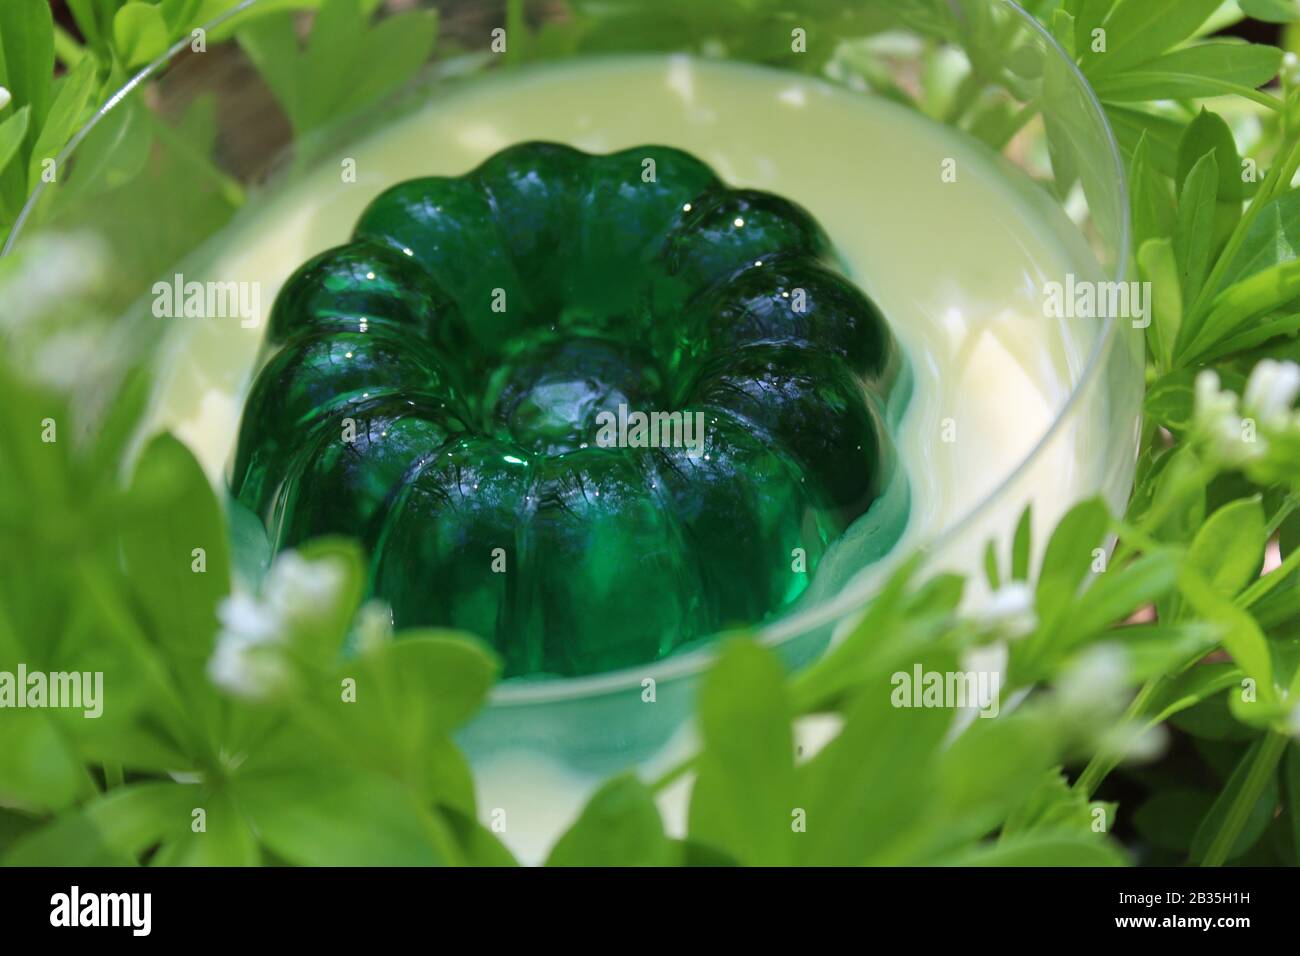 The picture shows woodruff dessert in a woodruff field Stock Photo